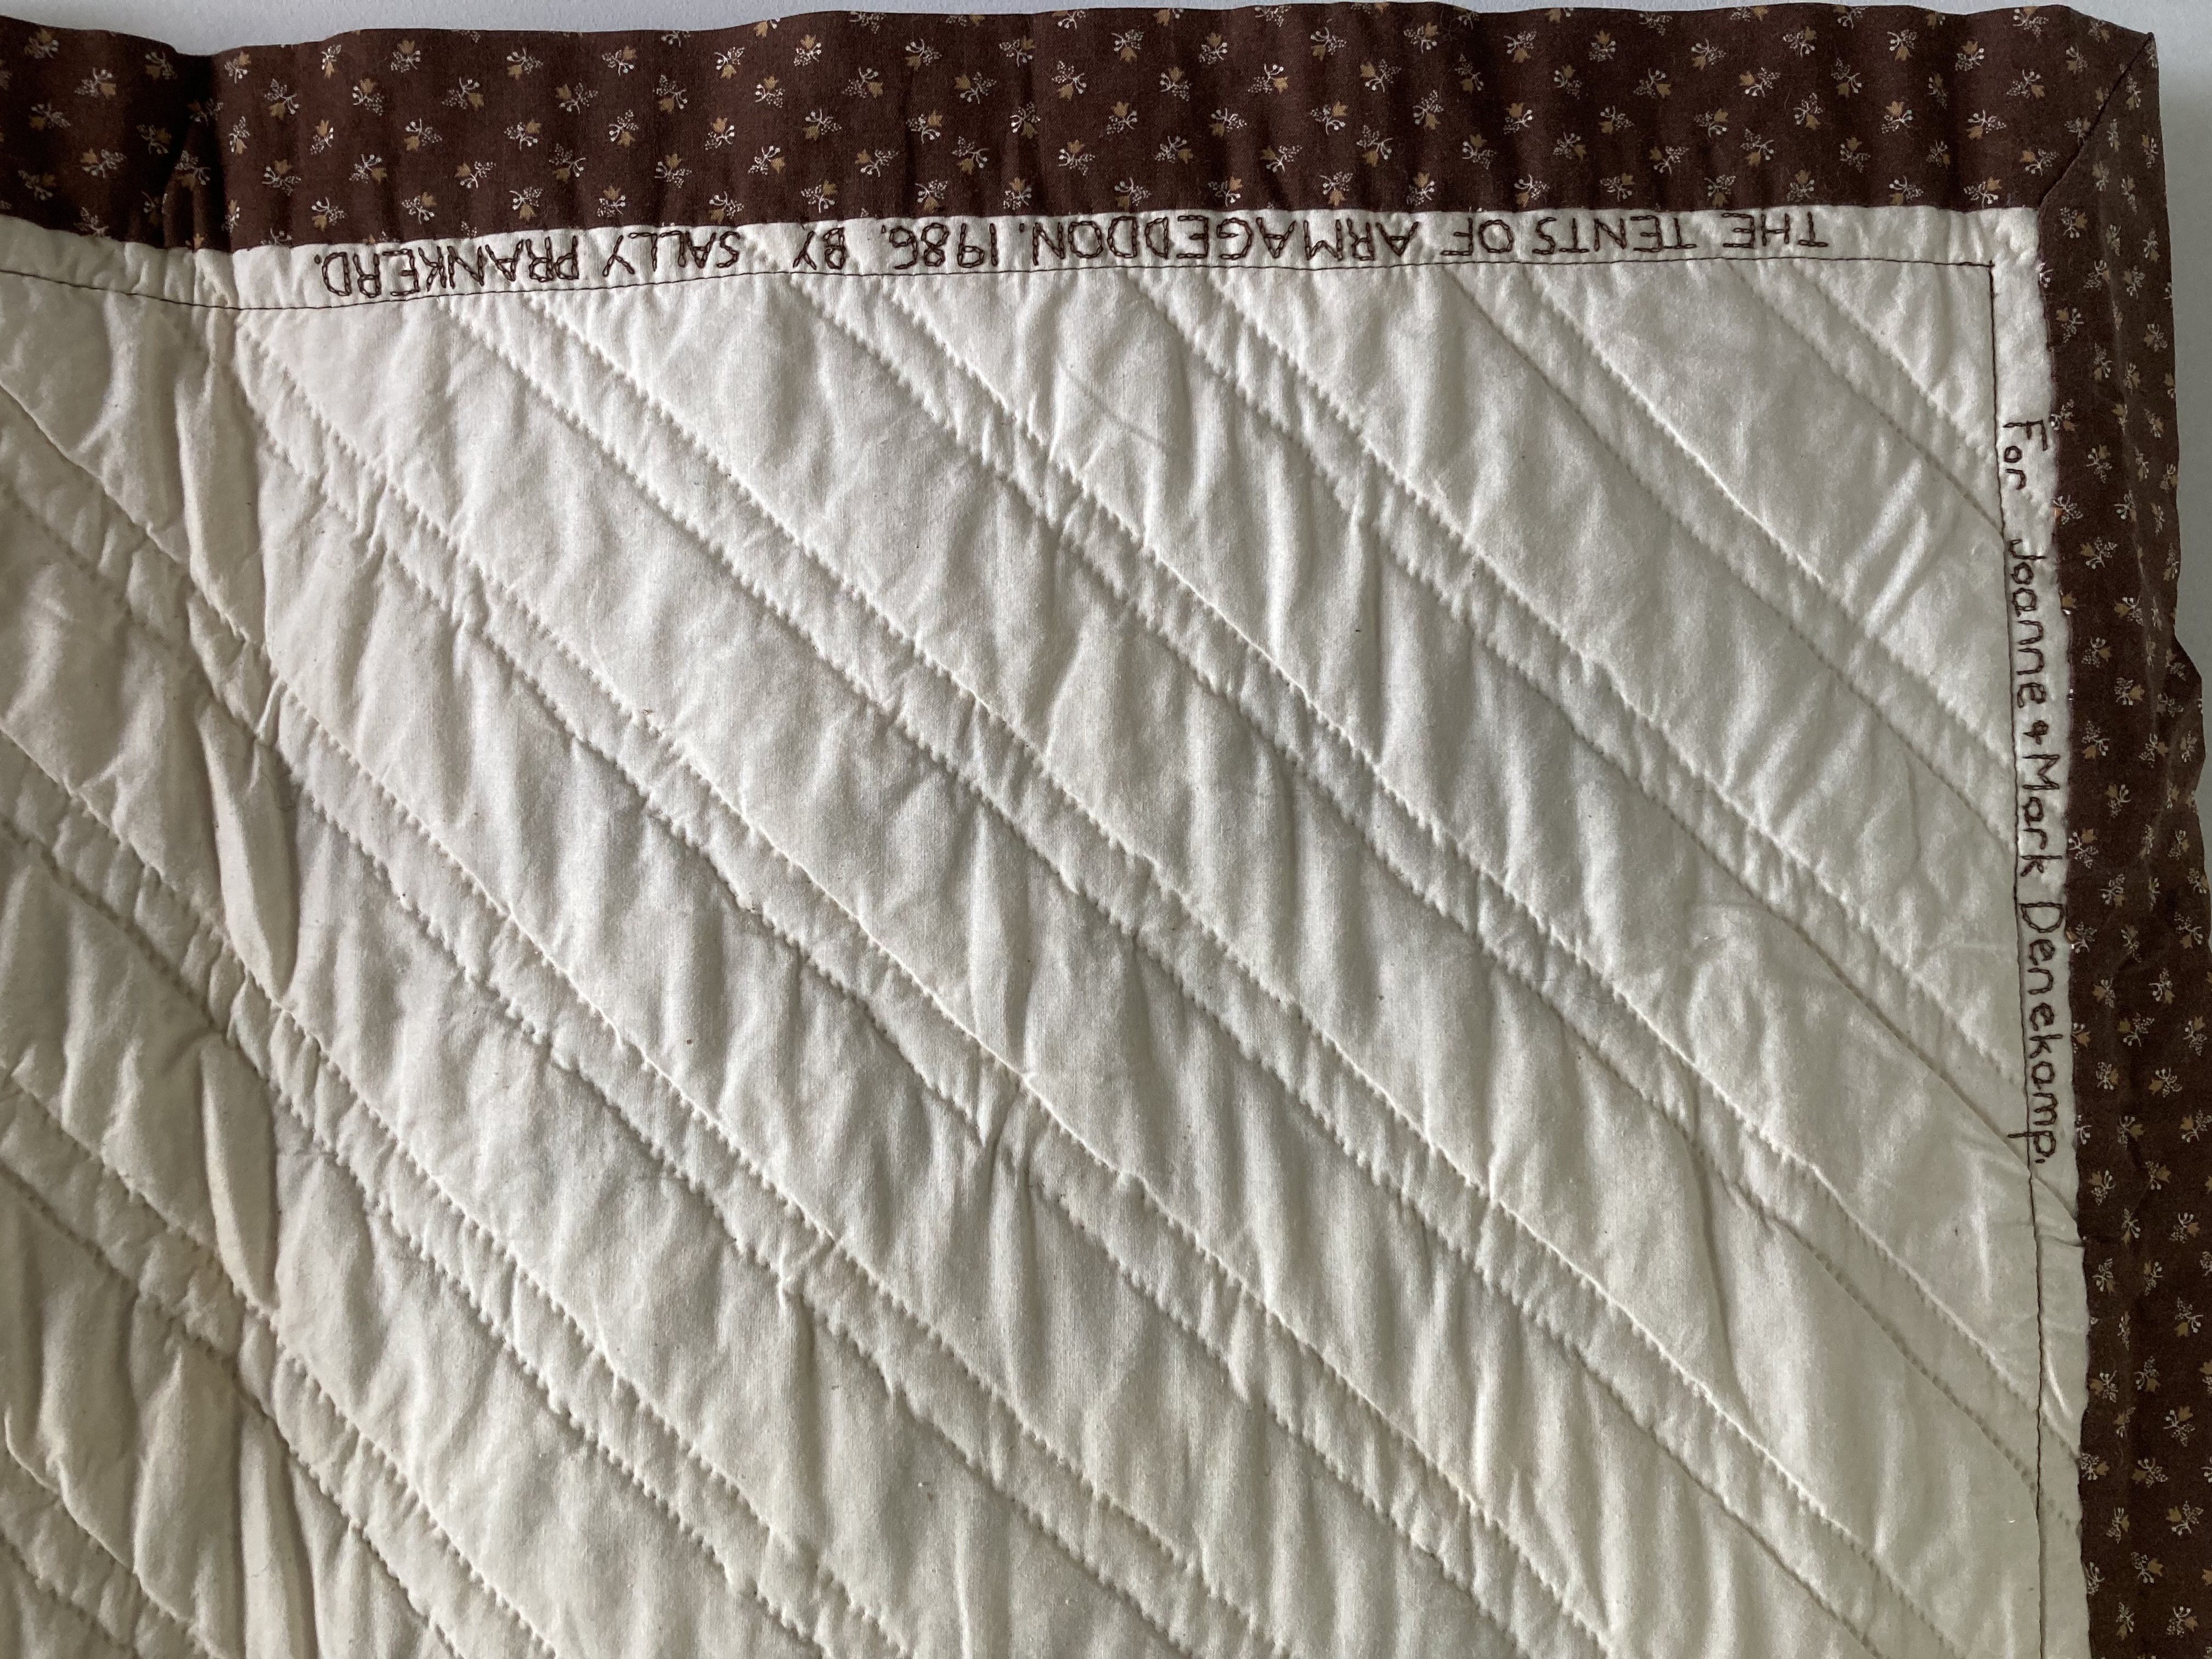 Quilt signature by my sister Sally P